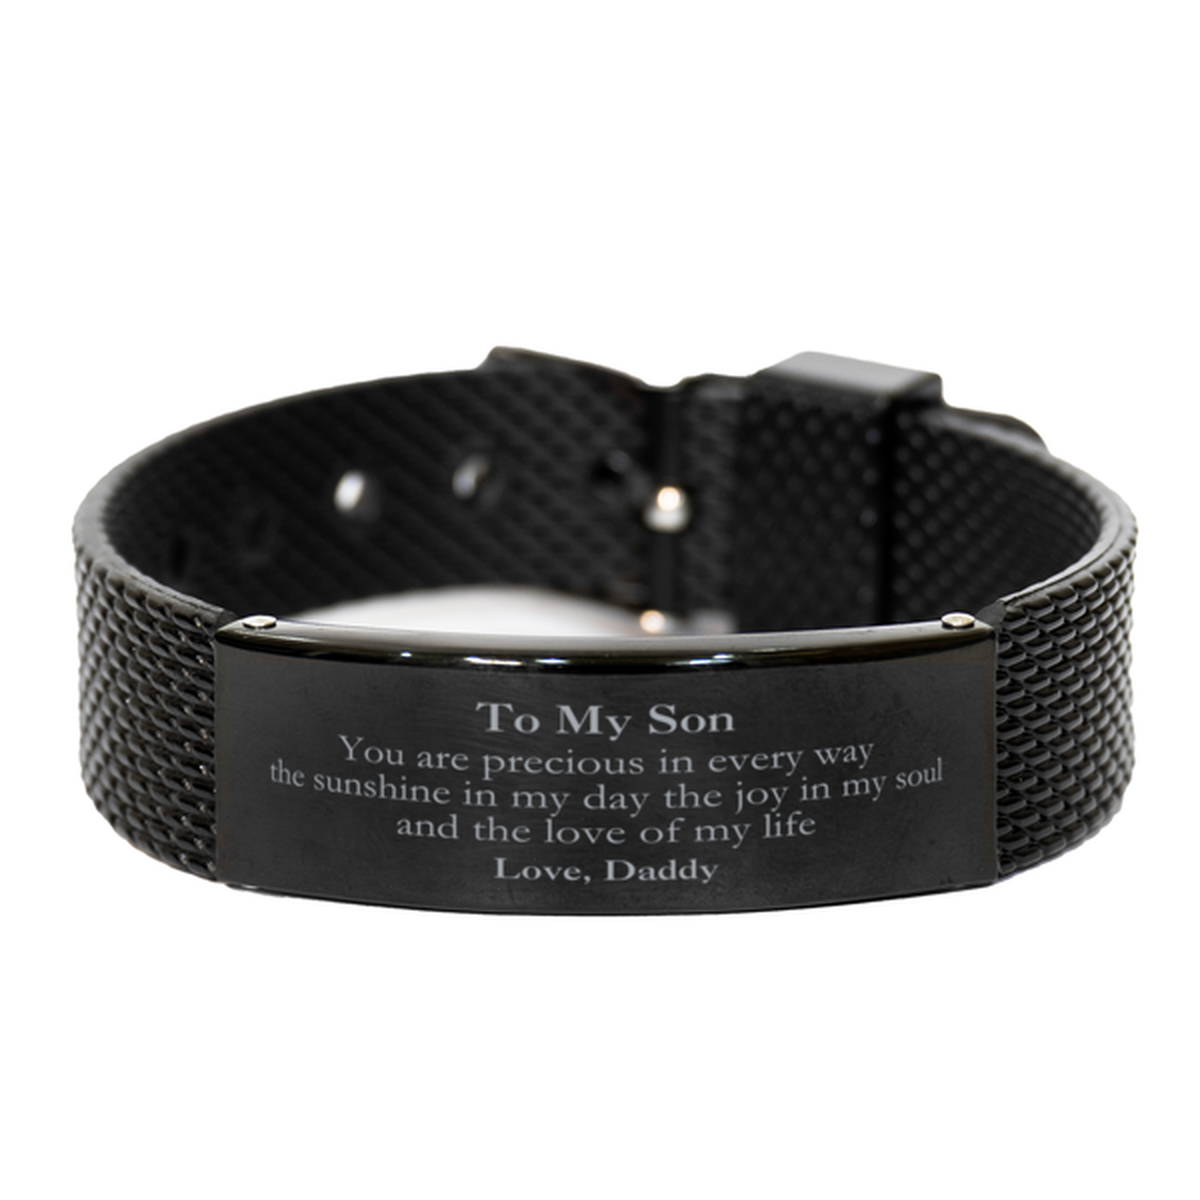 Graduation Gifts for Son Black Shark Mesh Bracelet Present from Daddy, Christmas Son Birthday Gifts Son You are precious in every way the sunshine in my day. Love, Daddy